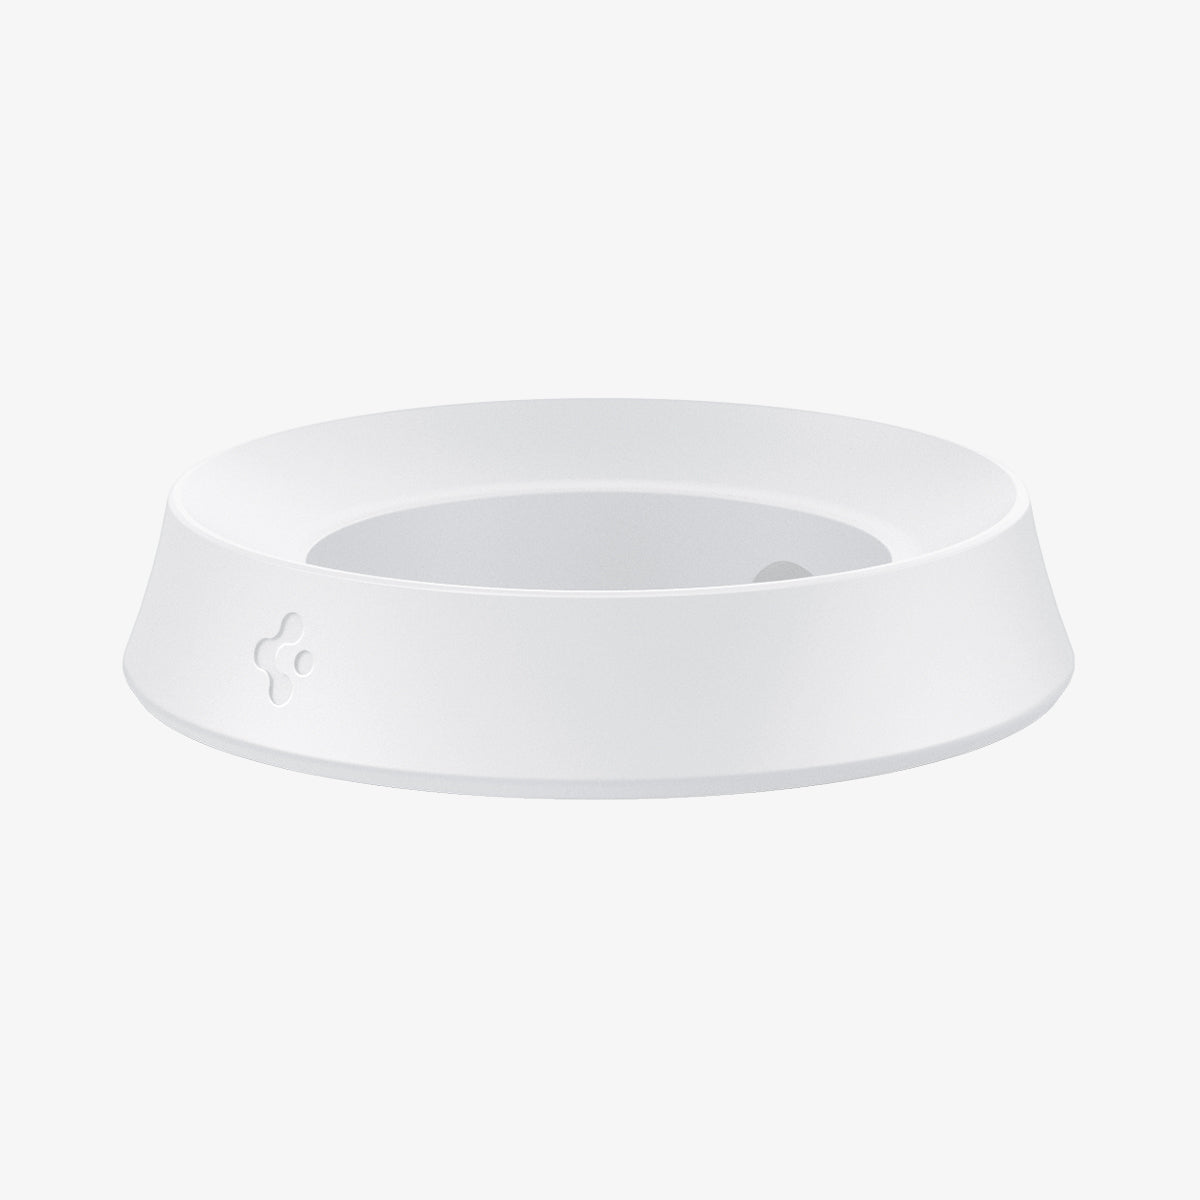 AMP02816 - Apple HomePod Mini Stand Silicone Fit in white showing the front and side